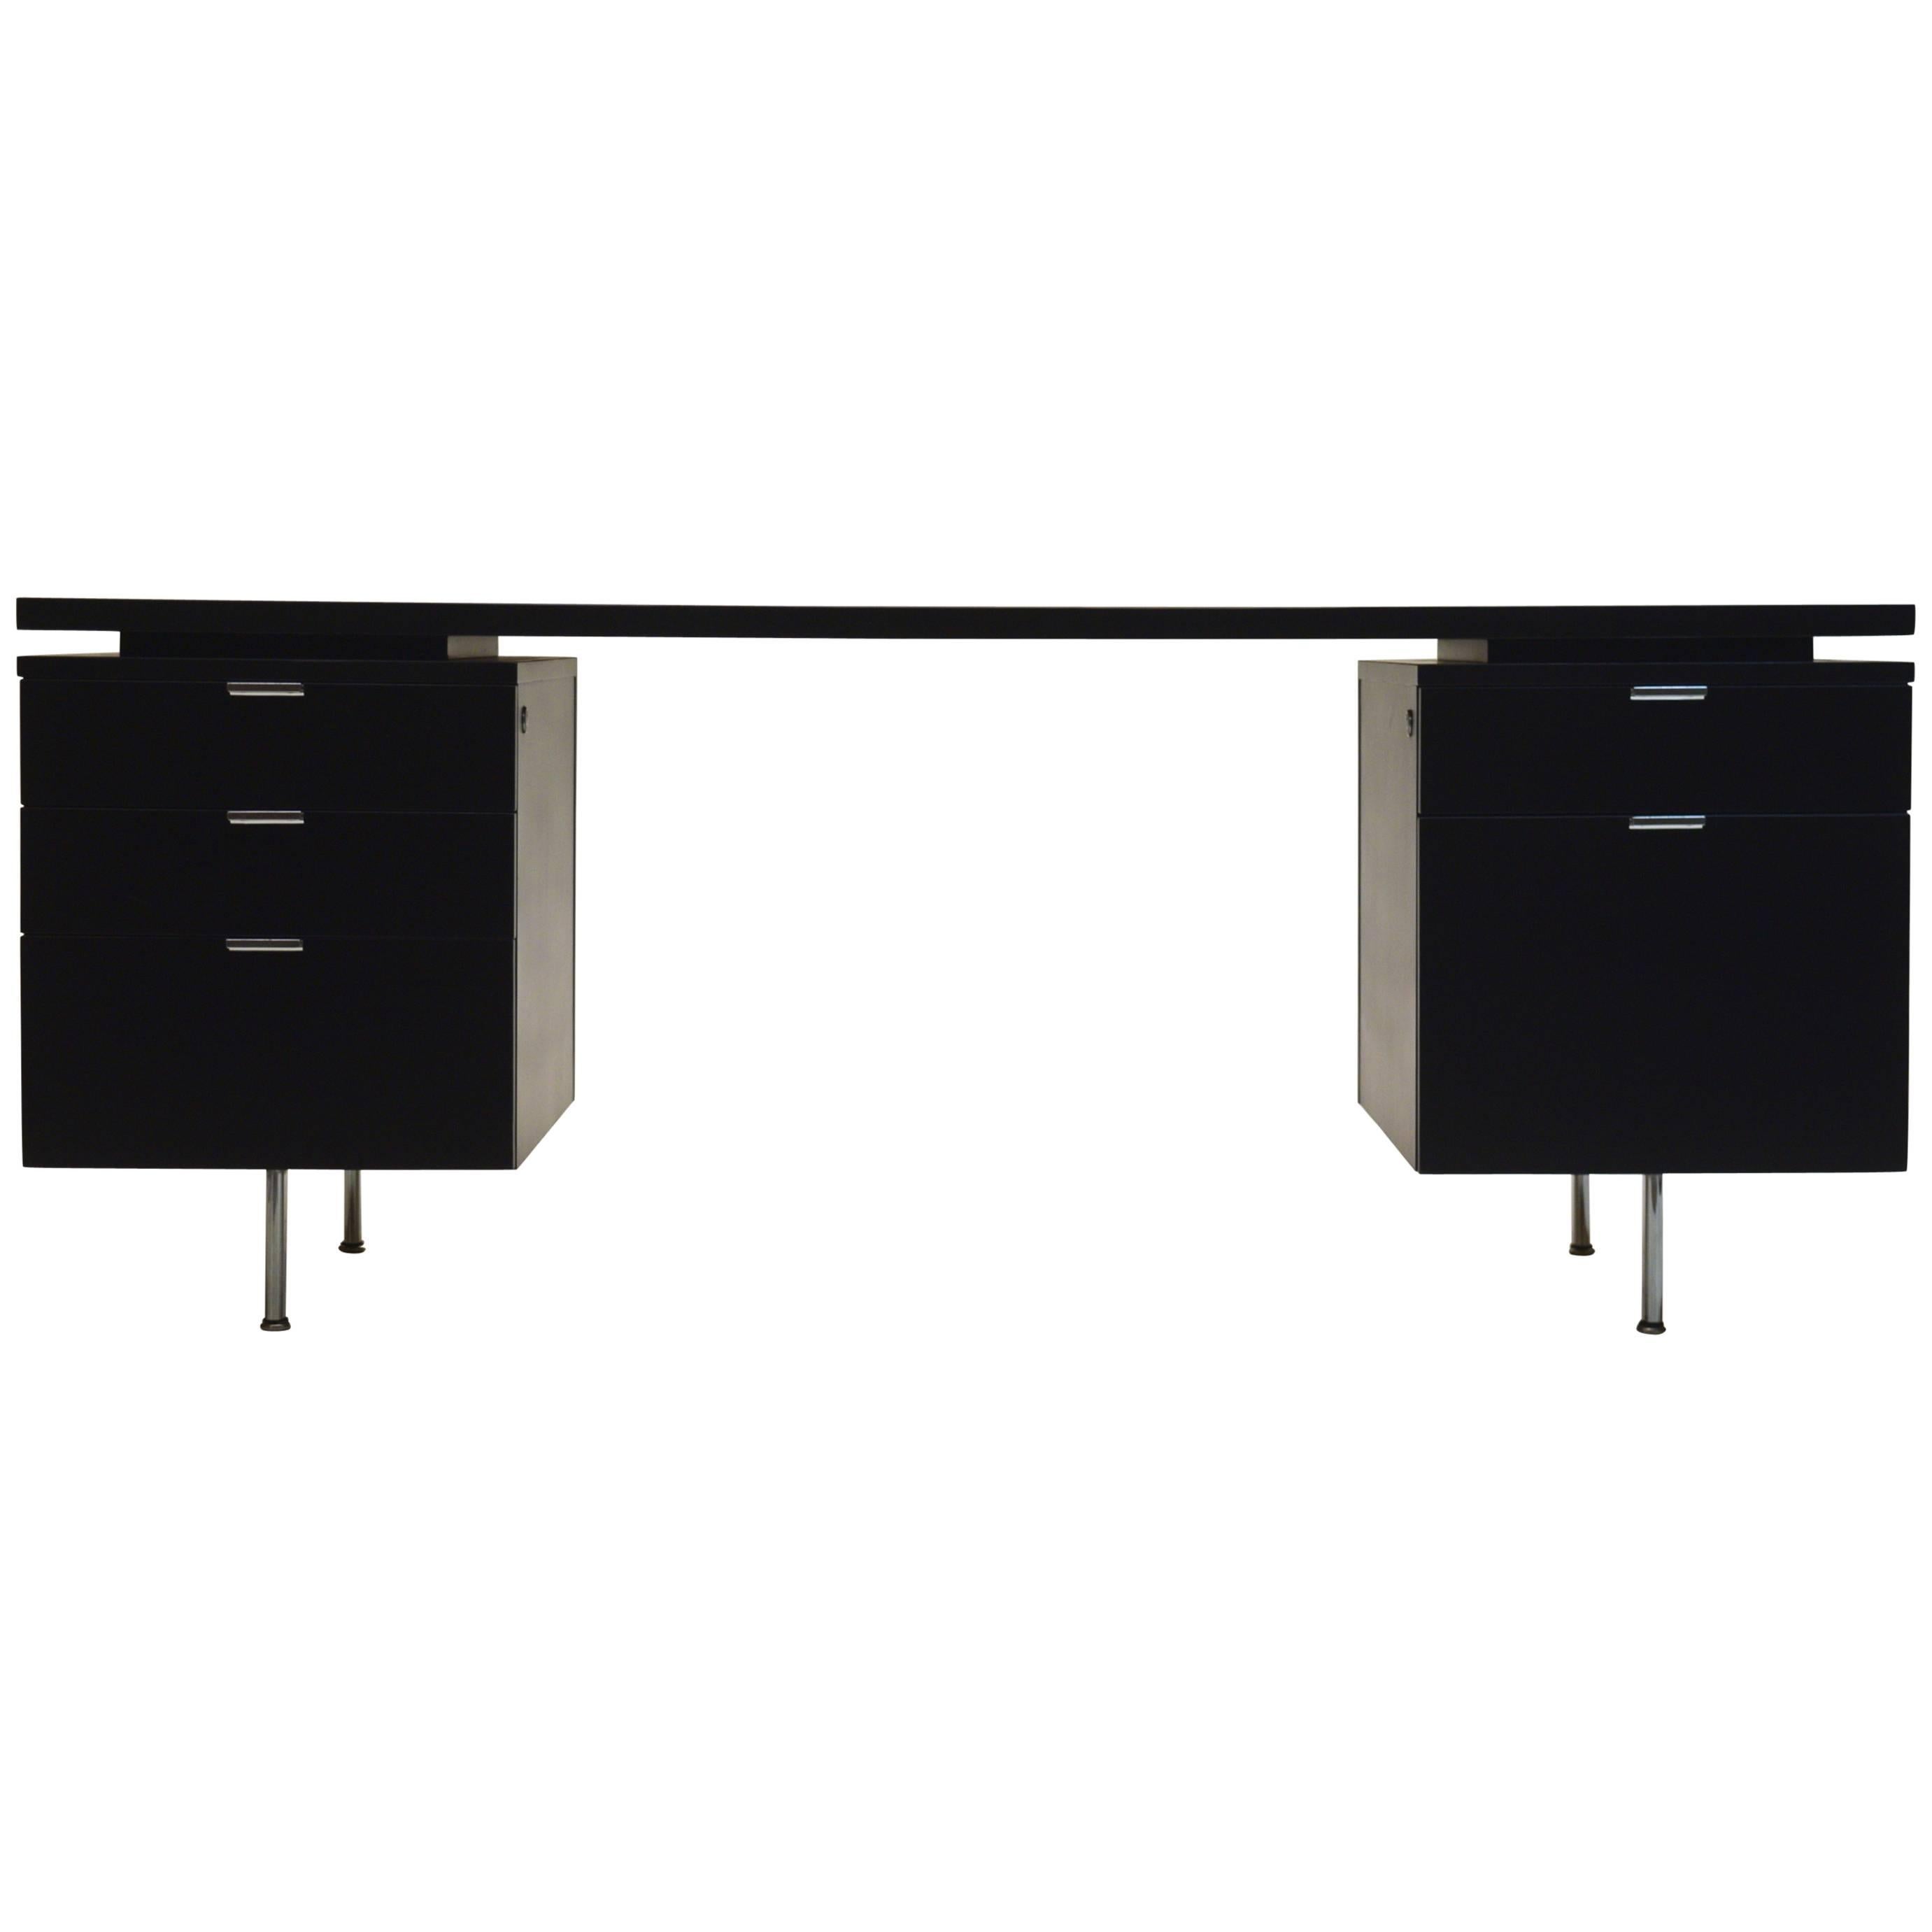 Exceptional Executive Desk by George Nelson for Herman Miller in Black Lacquer